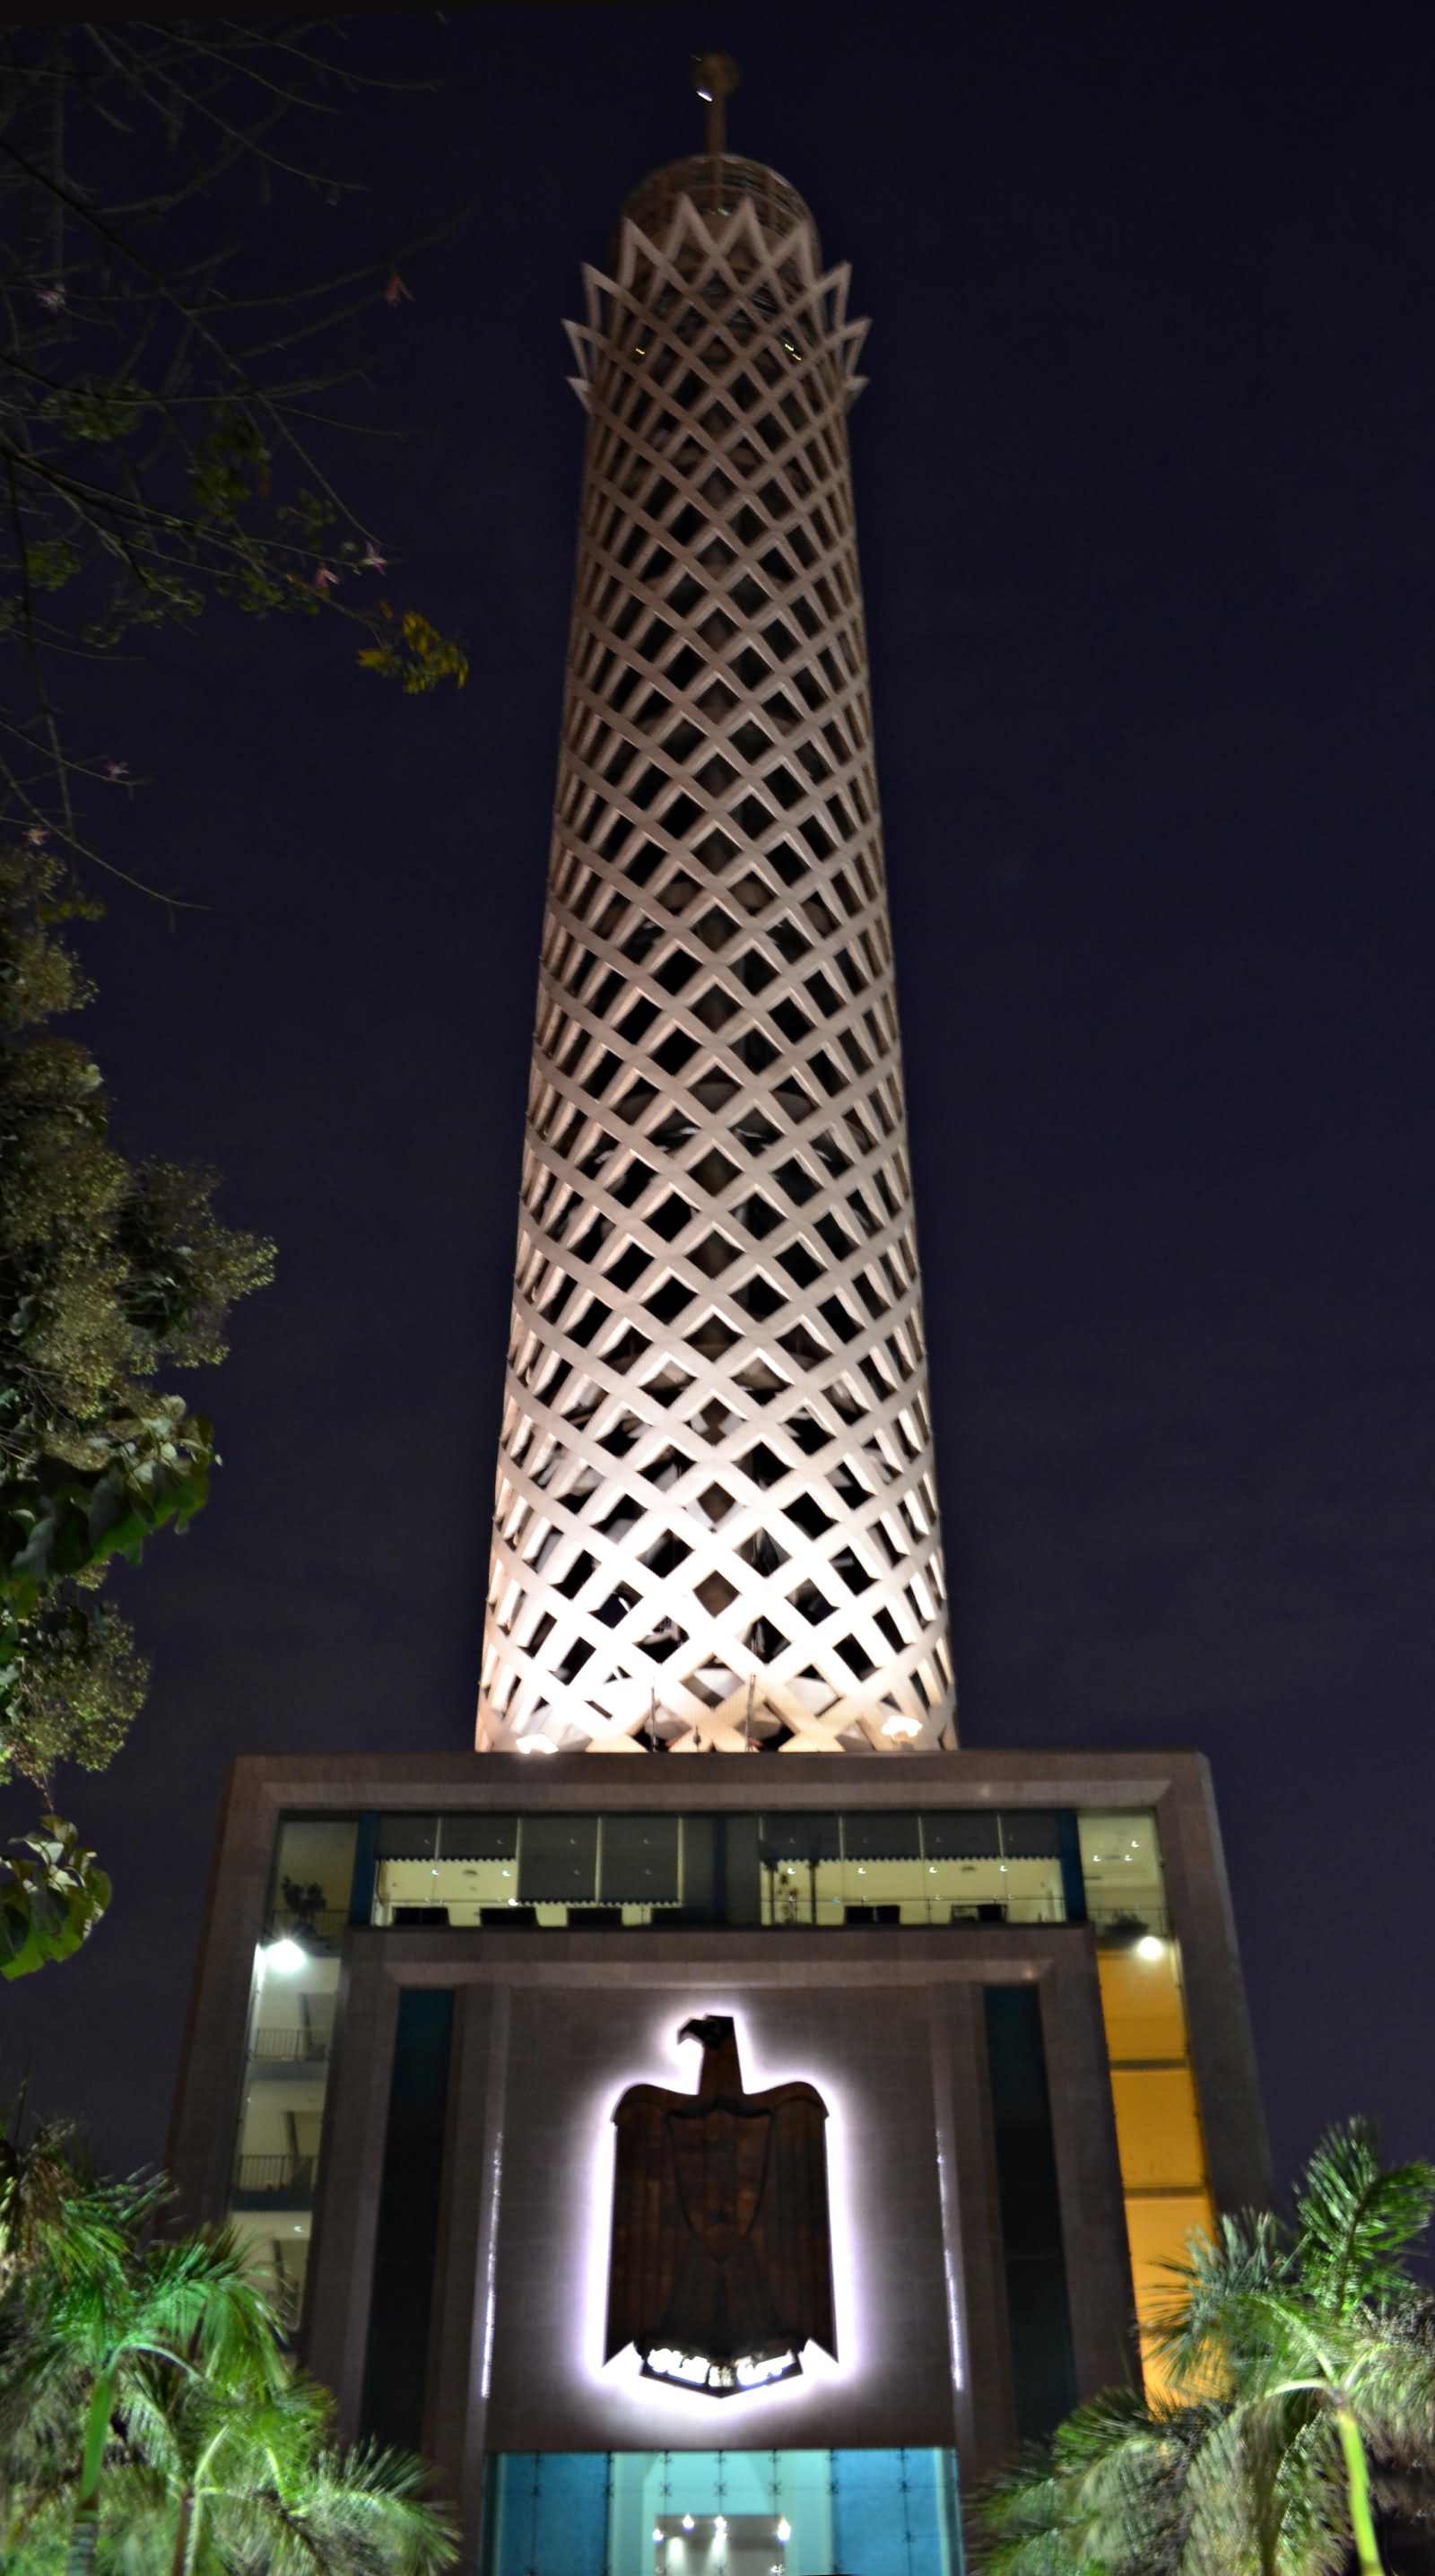 Cairo Tower At Night From Below